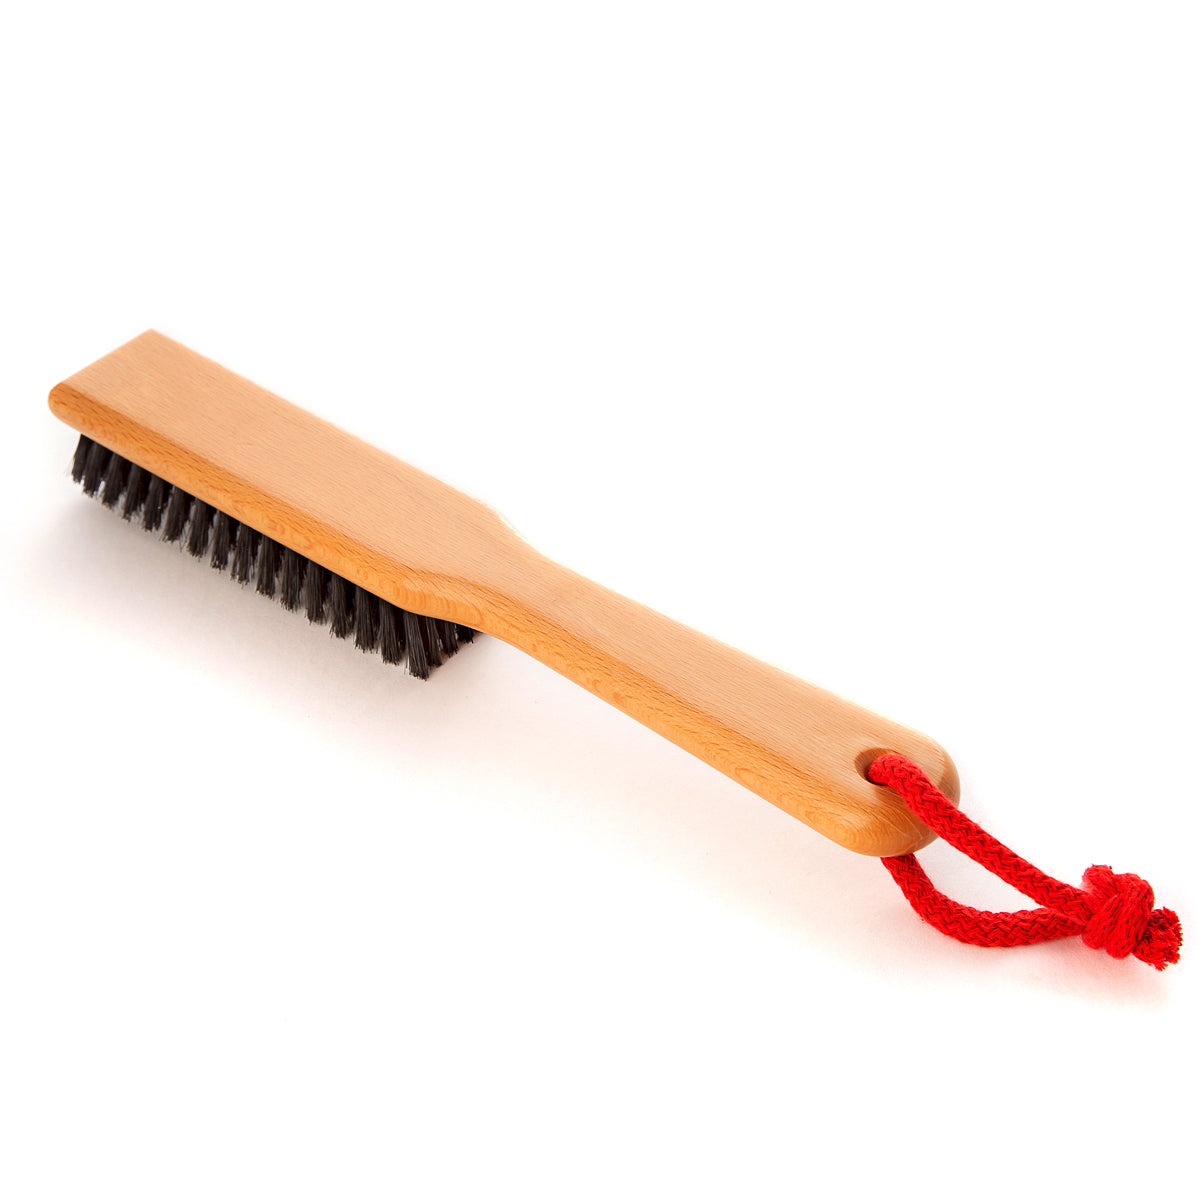 Beech Wood Clothes Brush